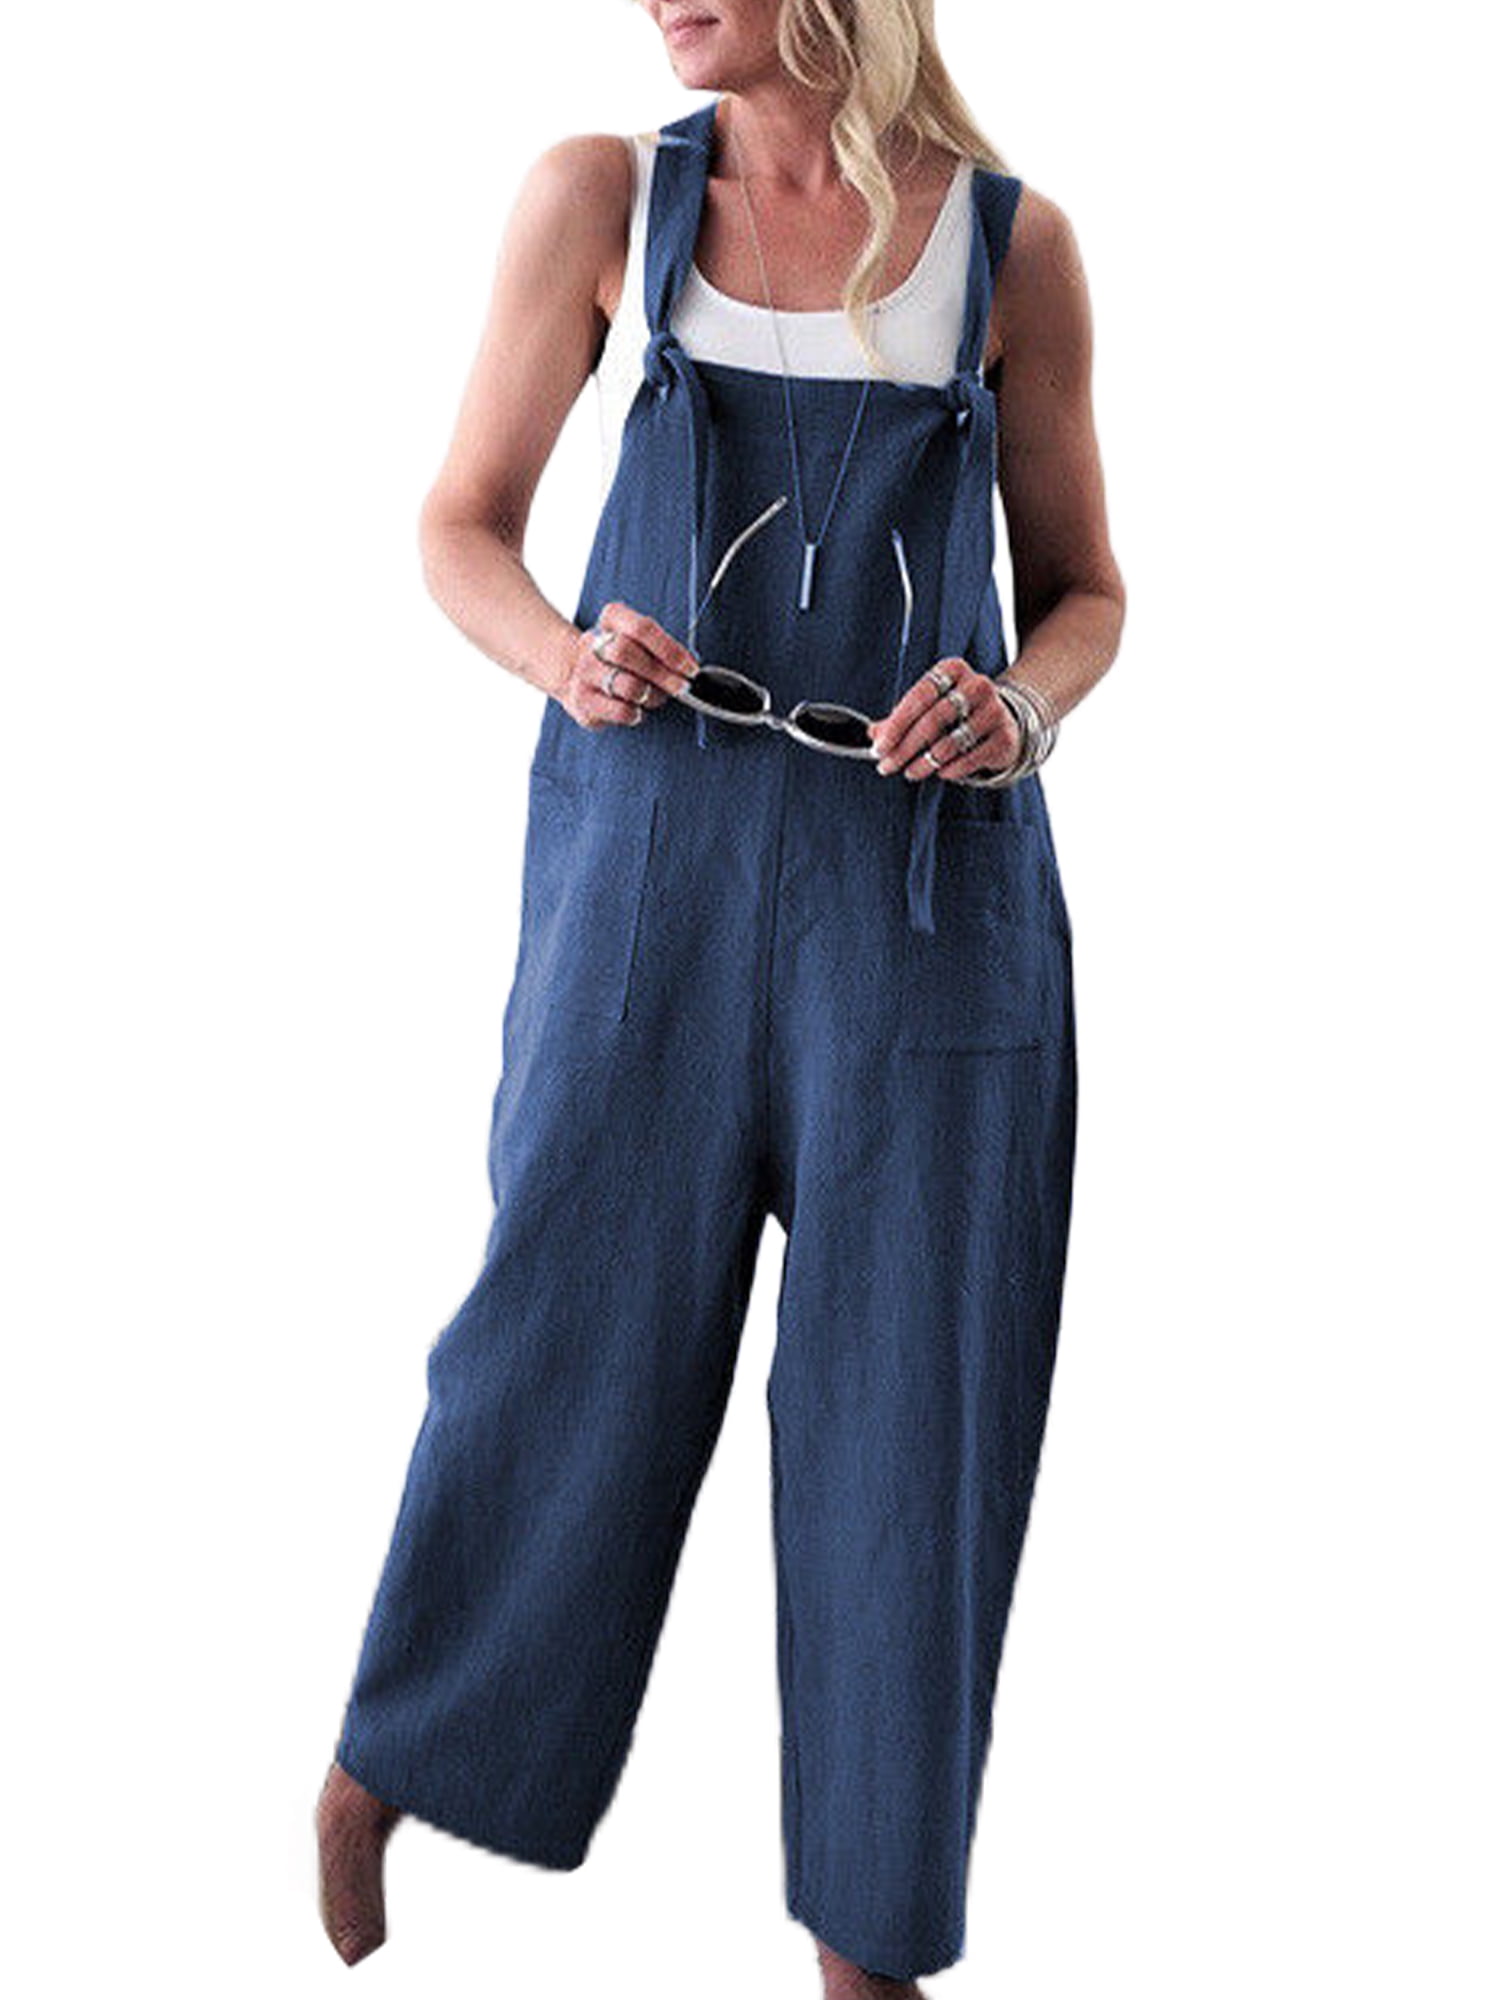 Linen Jumpsuits for Women Casual Loose Straps Overalls Baggy Wide Leg Harem  Pants Rompers Dungarees Playsuit Trousers 